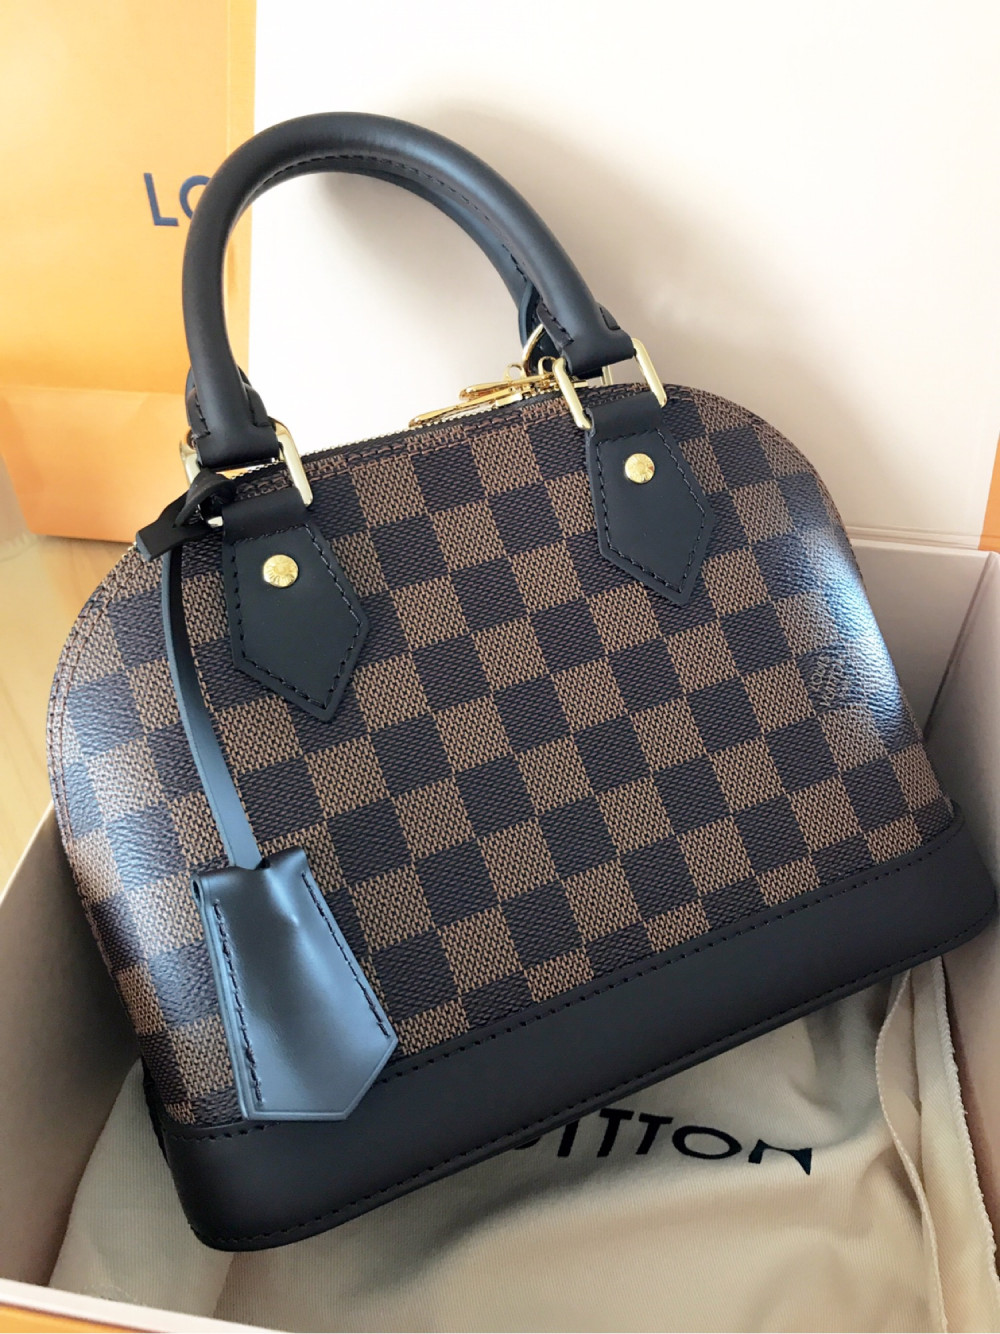 My naughty treat unboxing of a new to me Louis Vuitton denim blue